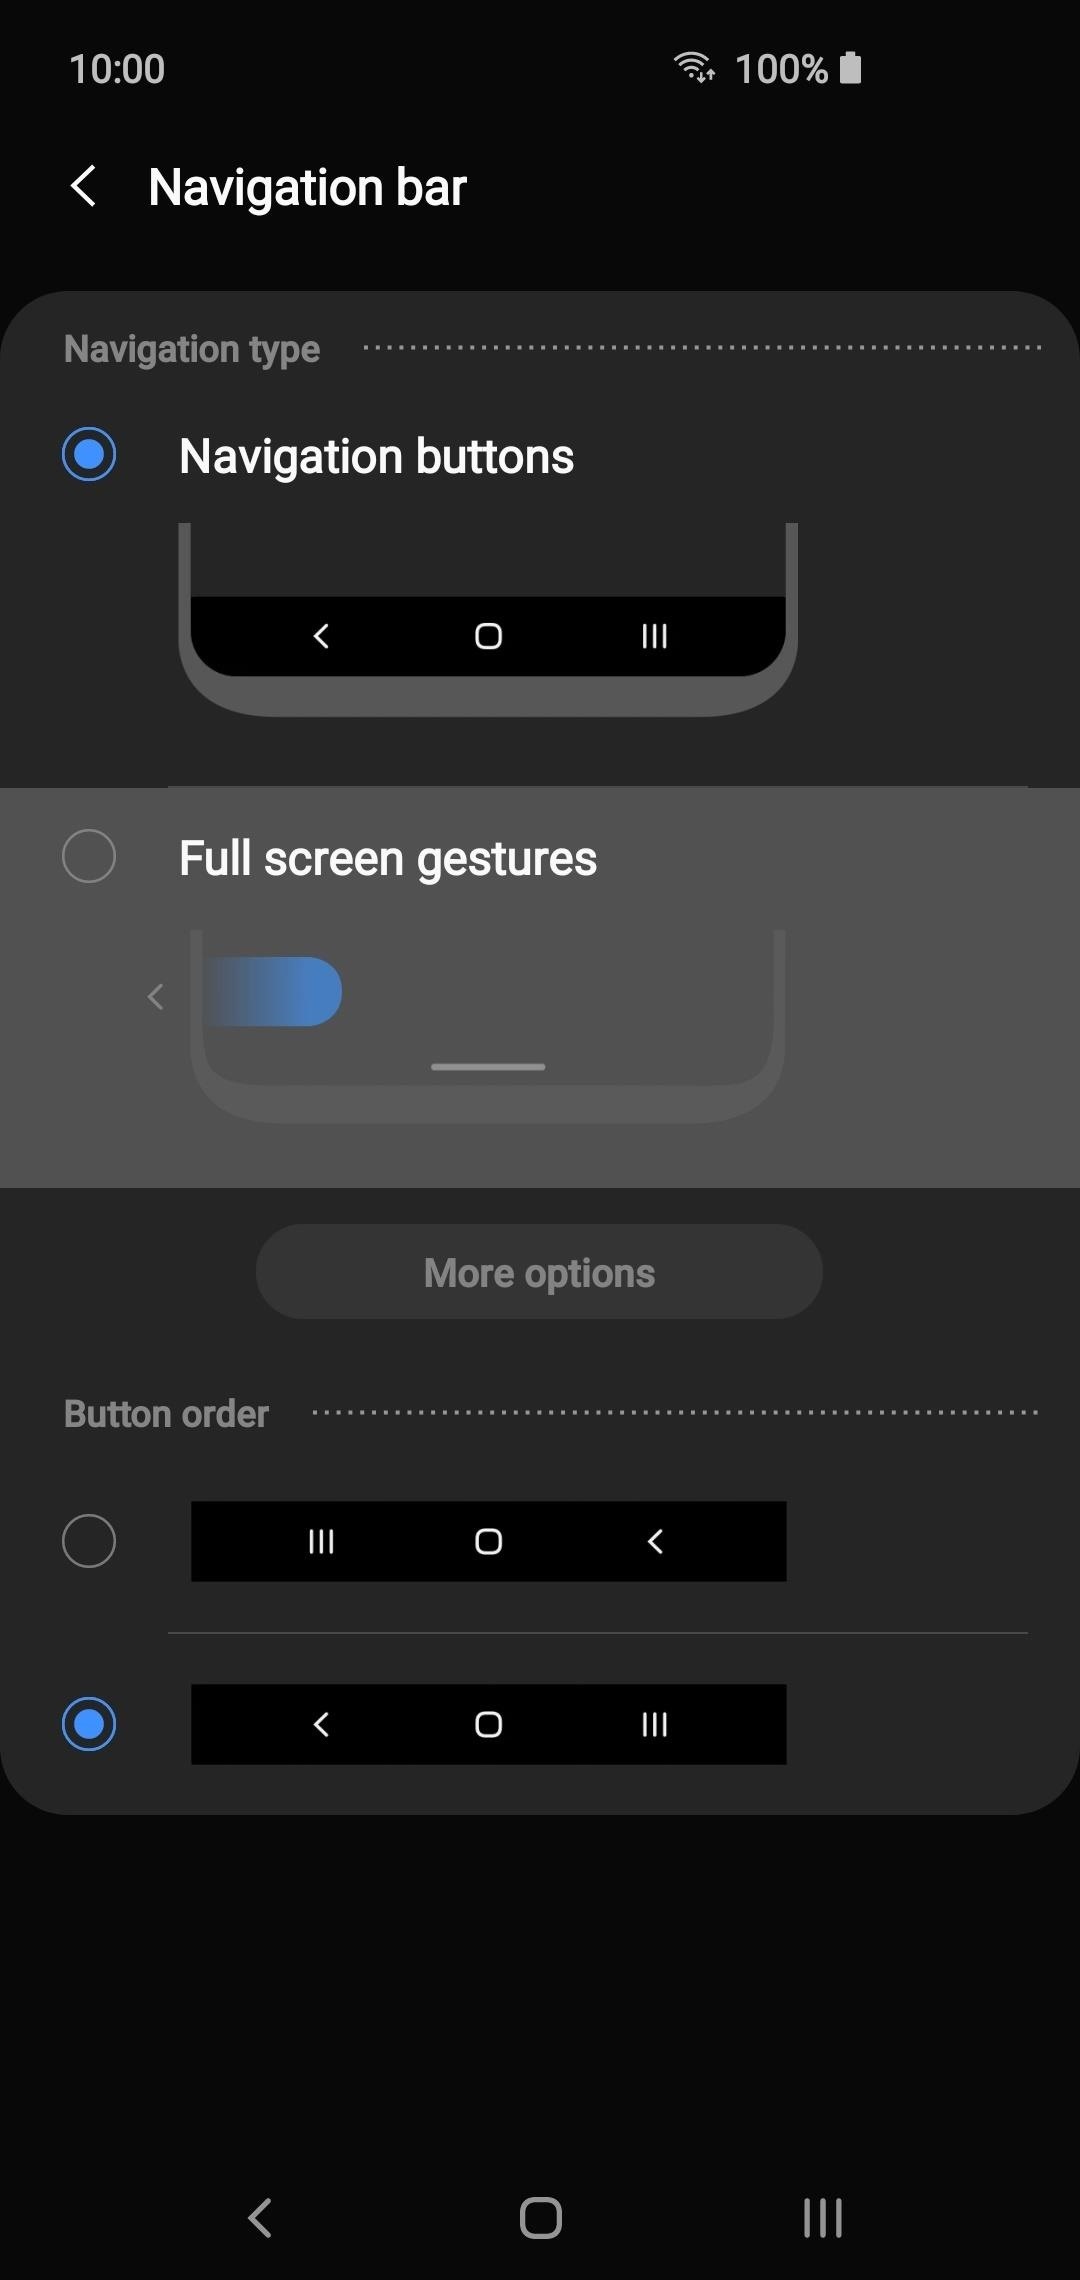 How to Enable Android 10's New Gestures on Your Samsung Galaxy with One UI 2